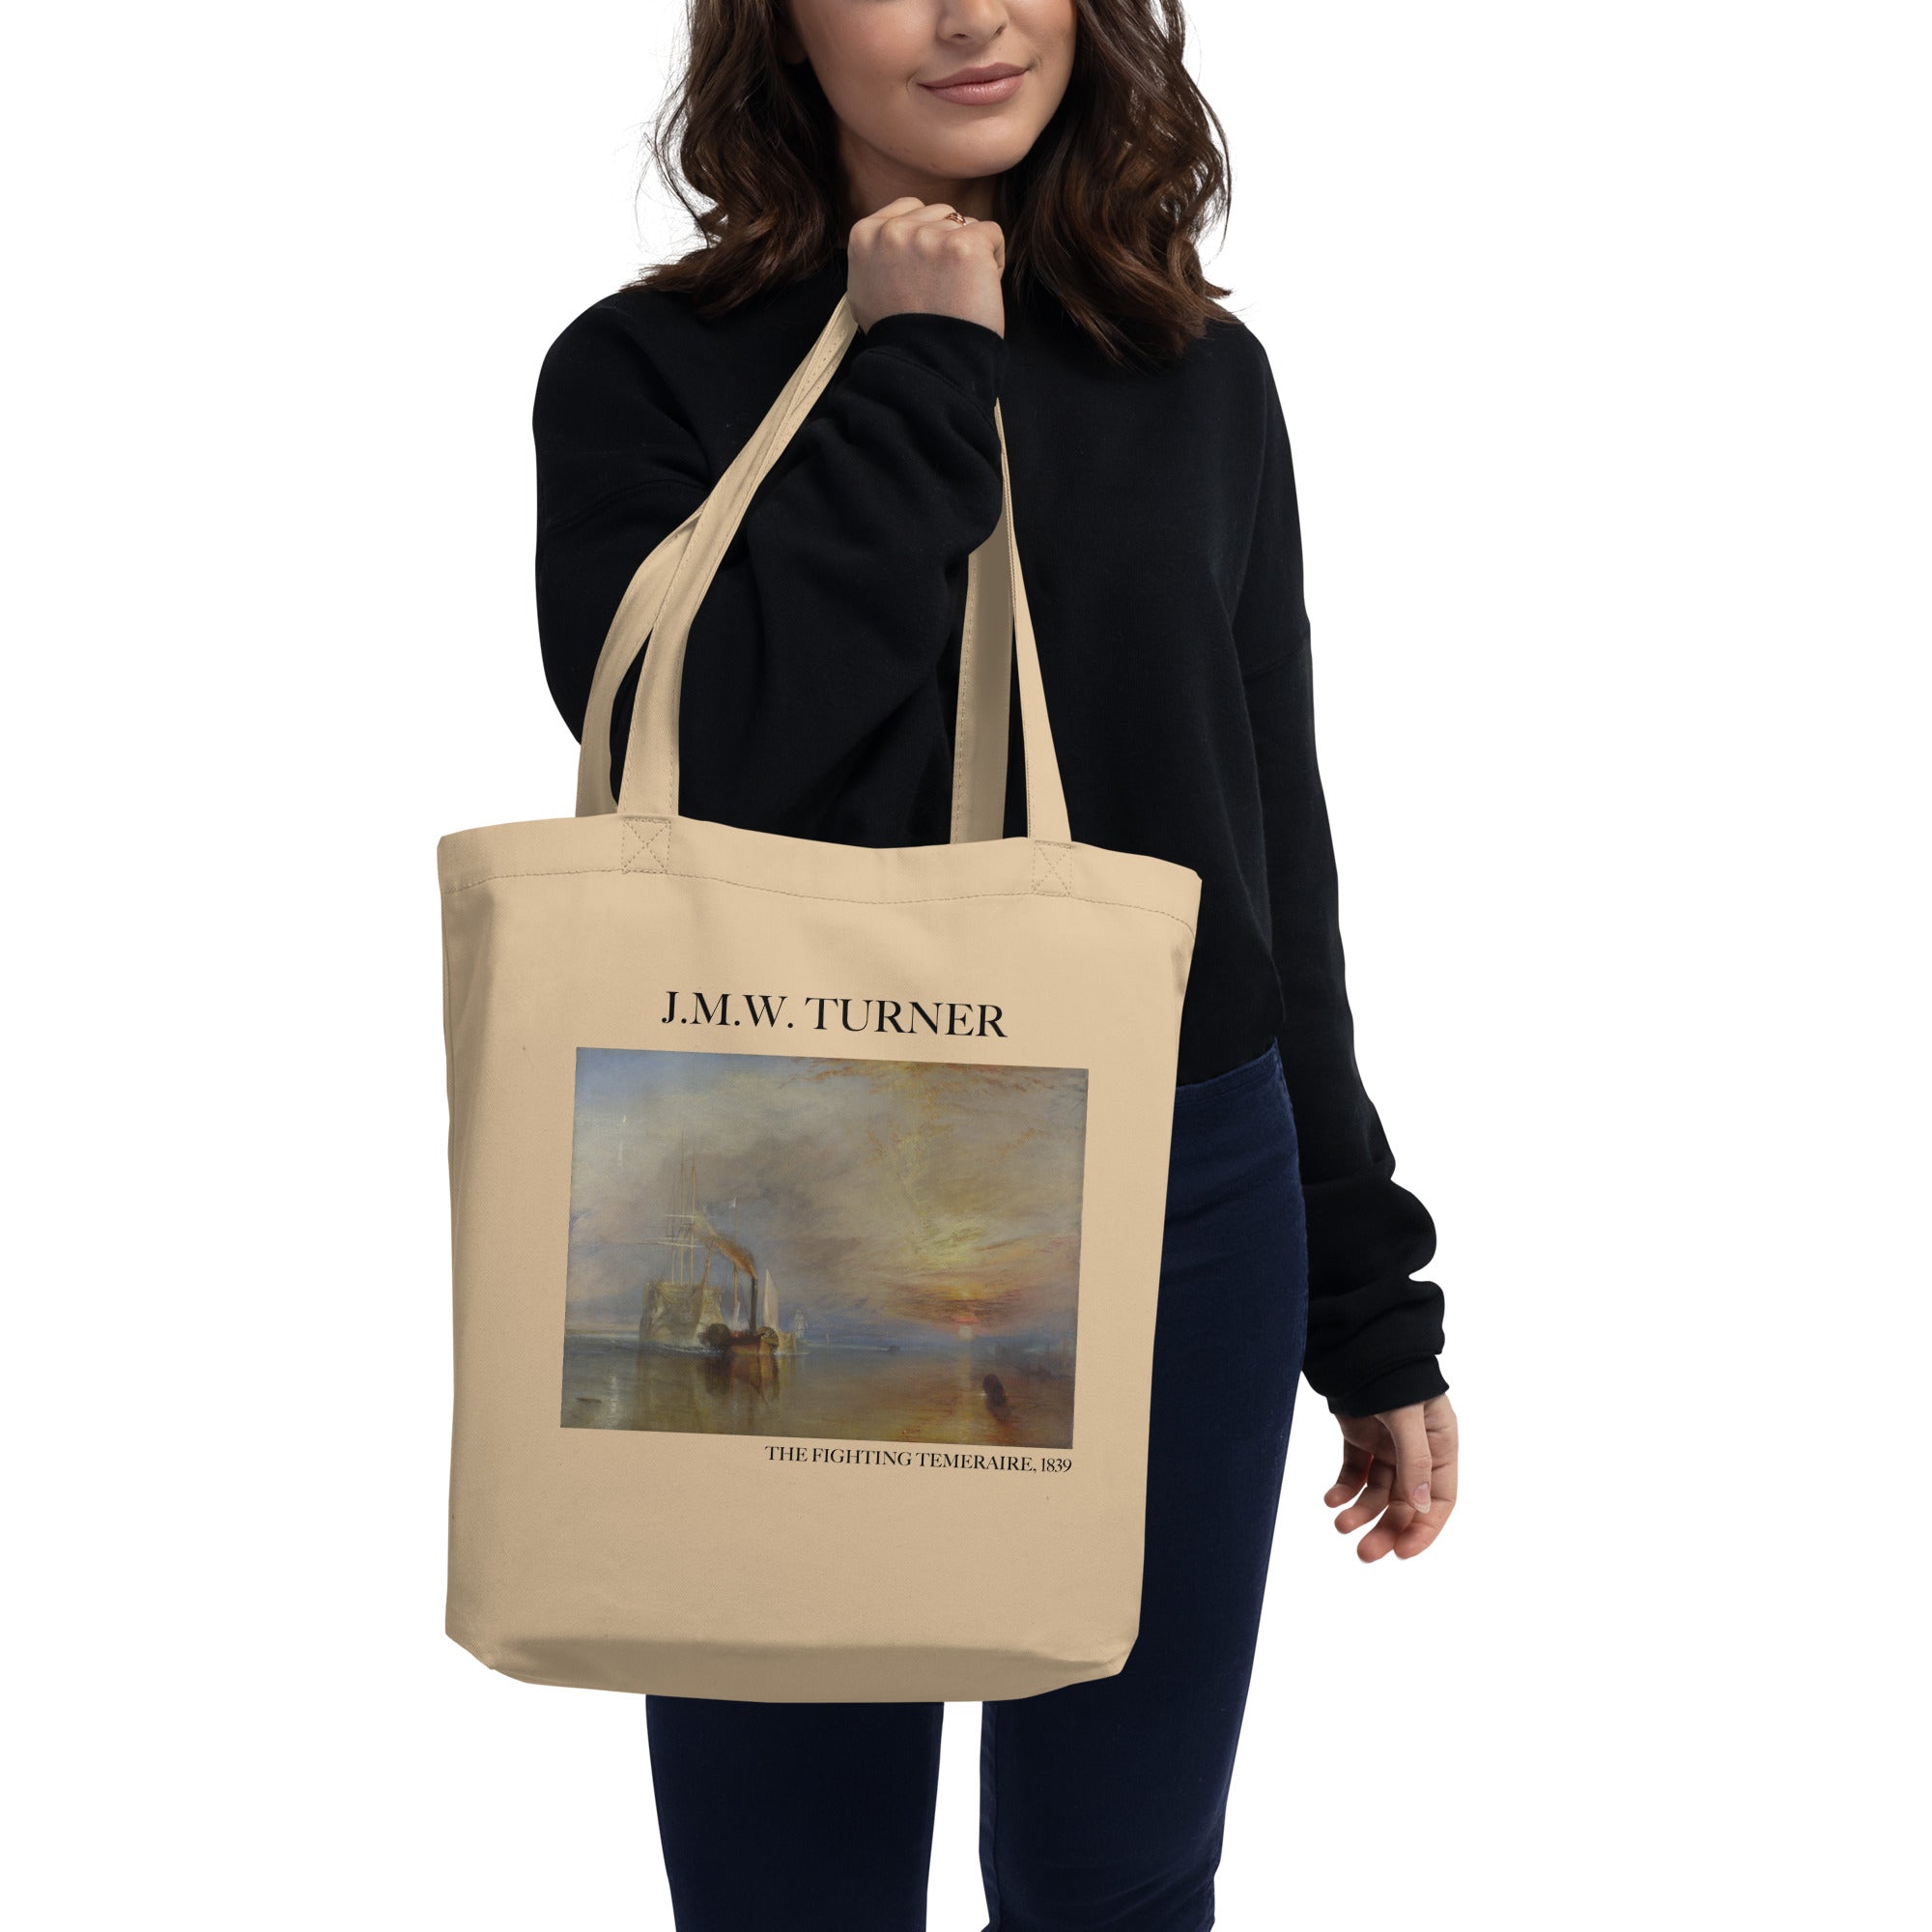 J.M.W. Turner 'The Fighting Temeraire' Famous Painting Totebag | Eco Friendly Art Tote Bag